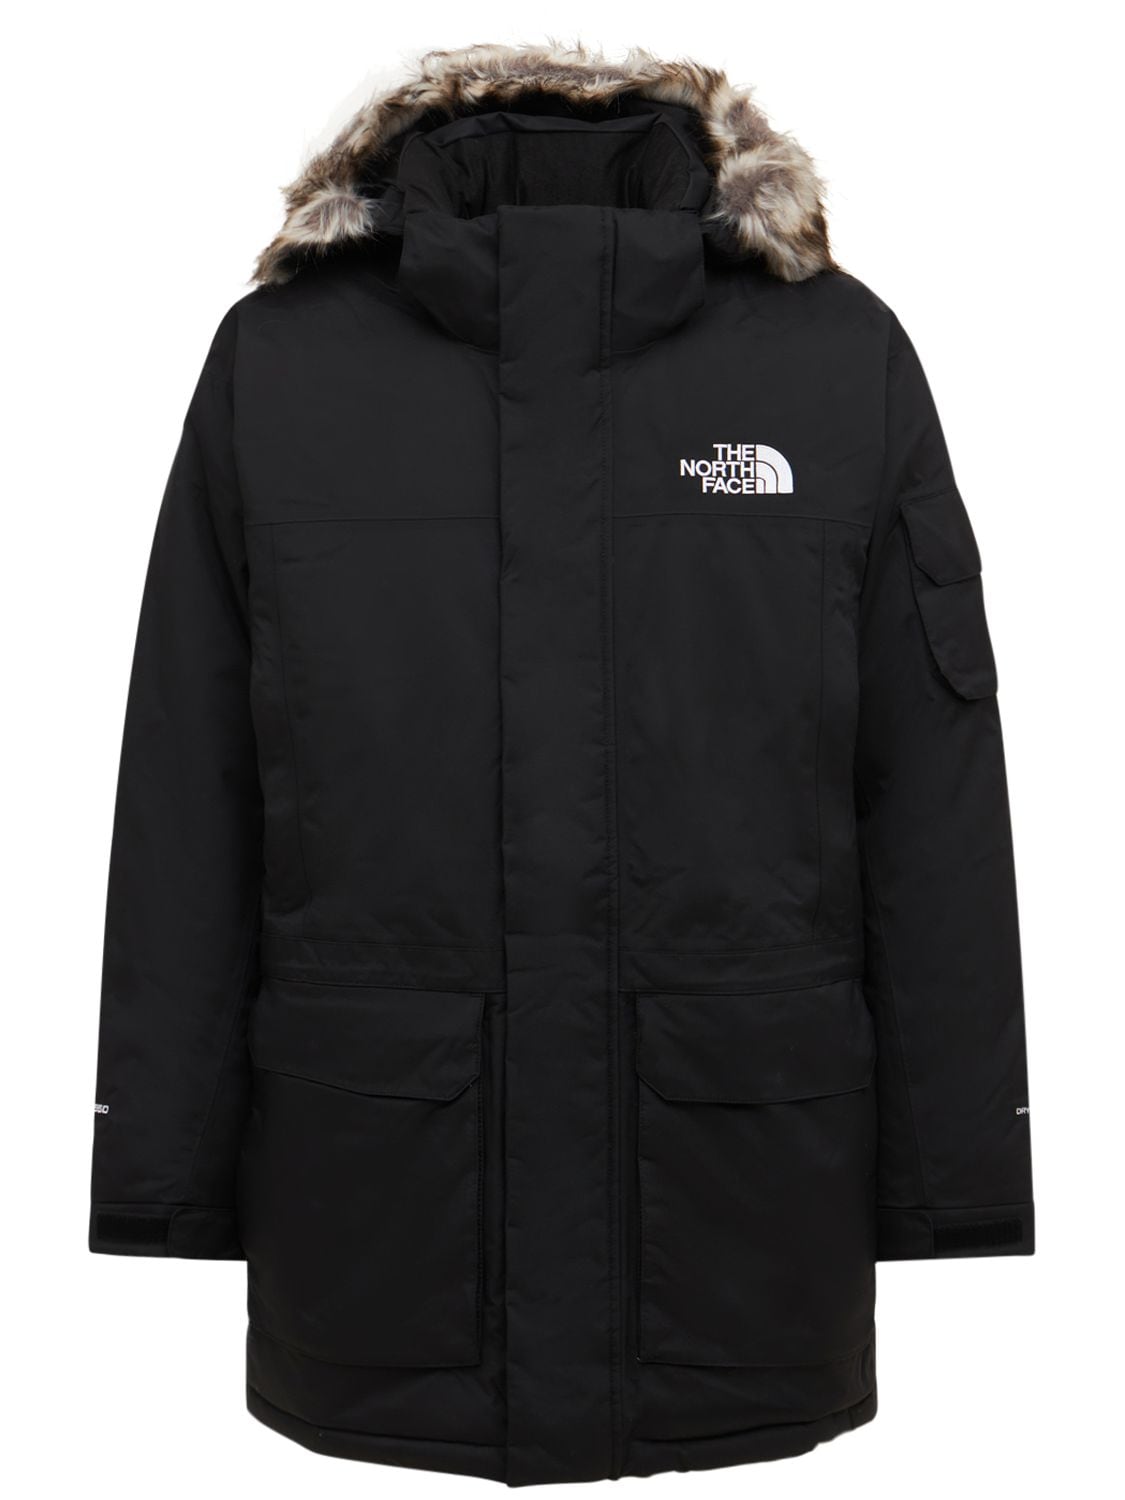 THE NORTH FACE MCMURDO DOWN JACKET W/ FAUX FUR